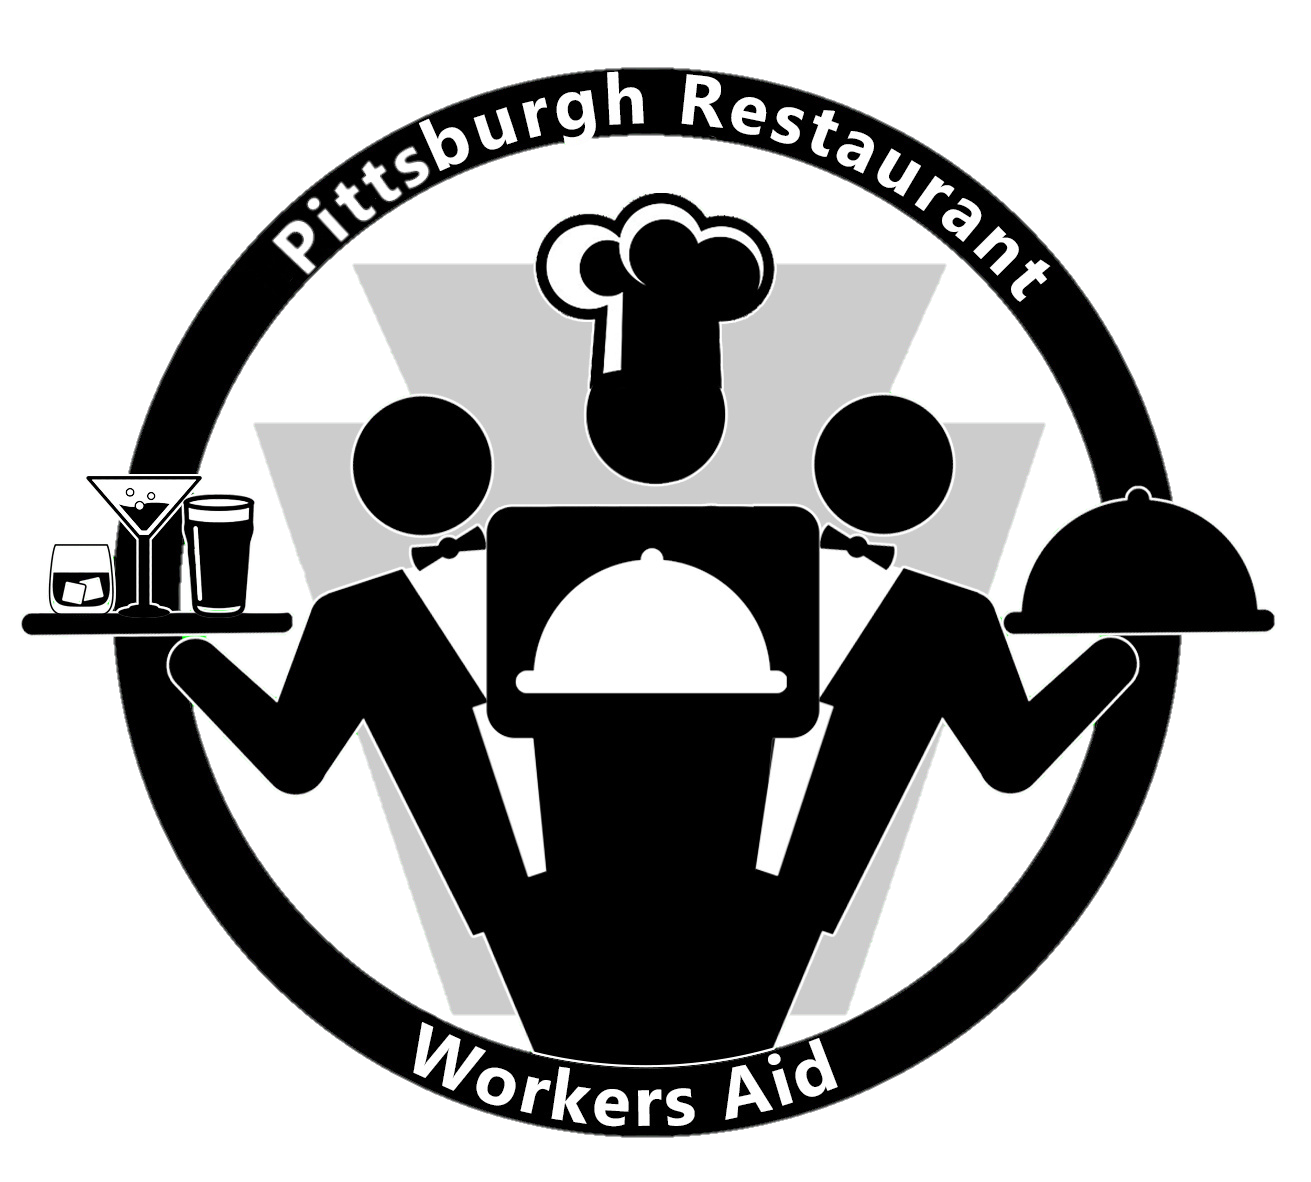 prwa-s-statement-on-paid-sick-leave-pittsburgh-restaurant-workers-aid